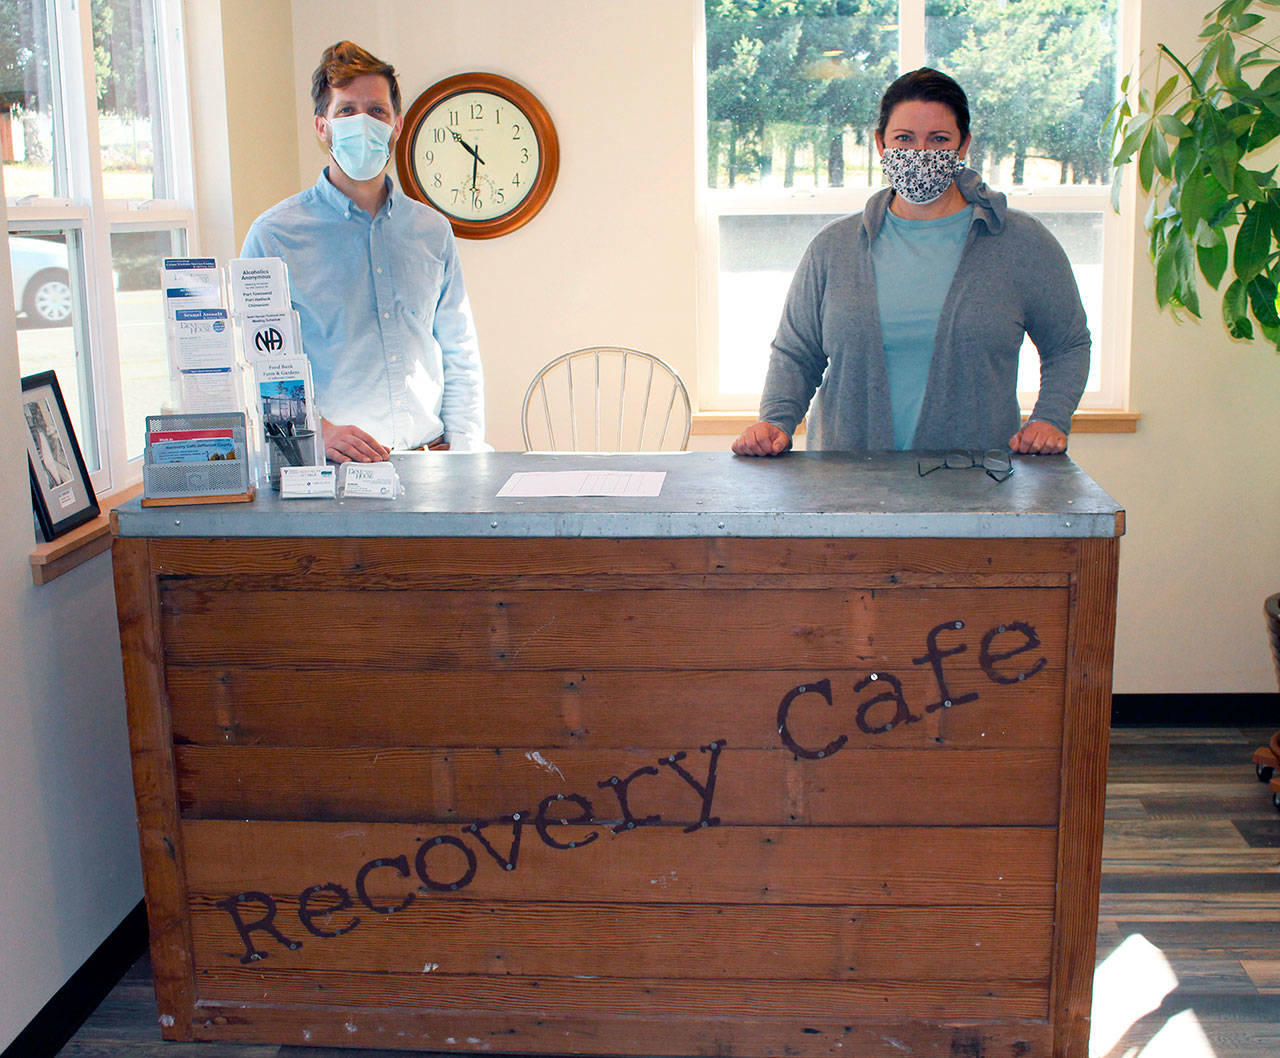 Recovery Cafe Program Manager Brian Richardson, left, along with volunteer and advisory committee member Maura Walsch, stand behind the welcome desk of the Recovery Cafe on Tuesday as the pair and other volunteers worked to finish the last pieces of the cafe’s renovations. (Zach Jablonski/Peninsula Daily News)